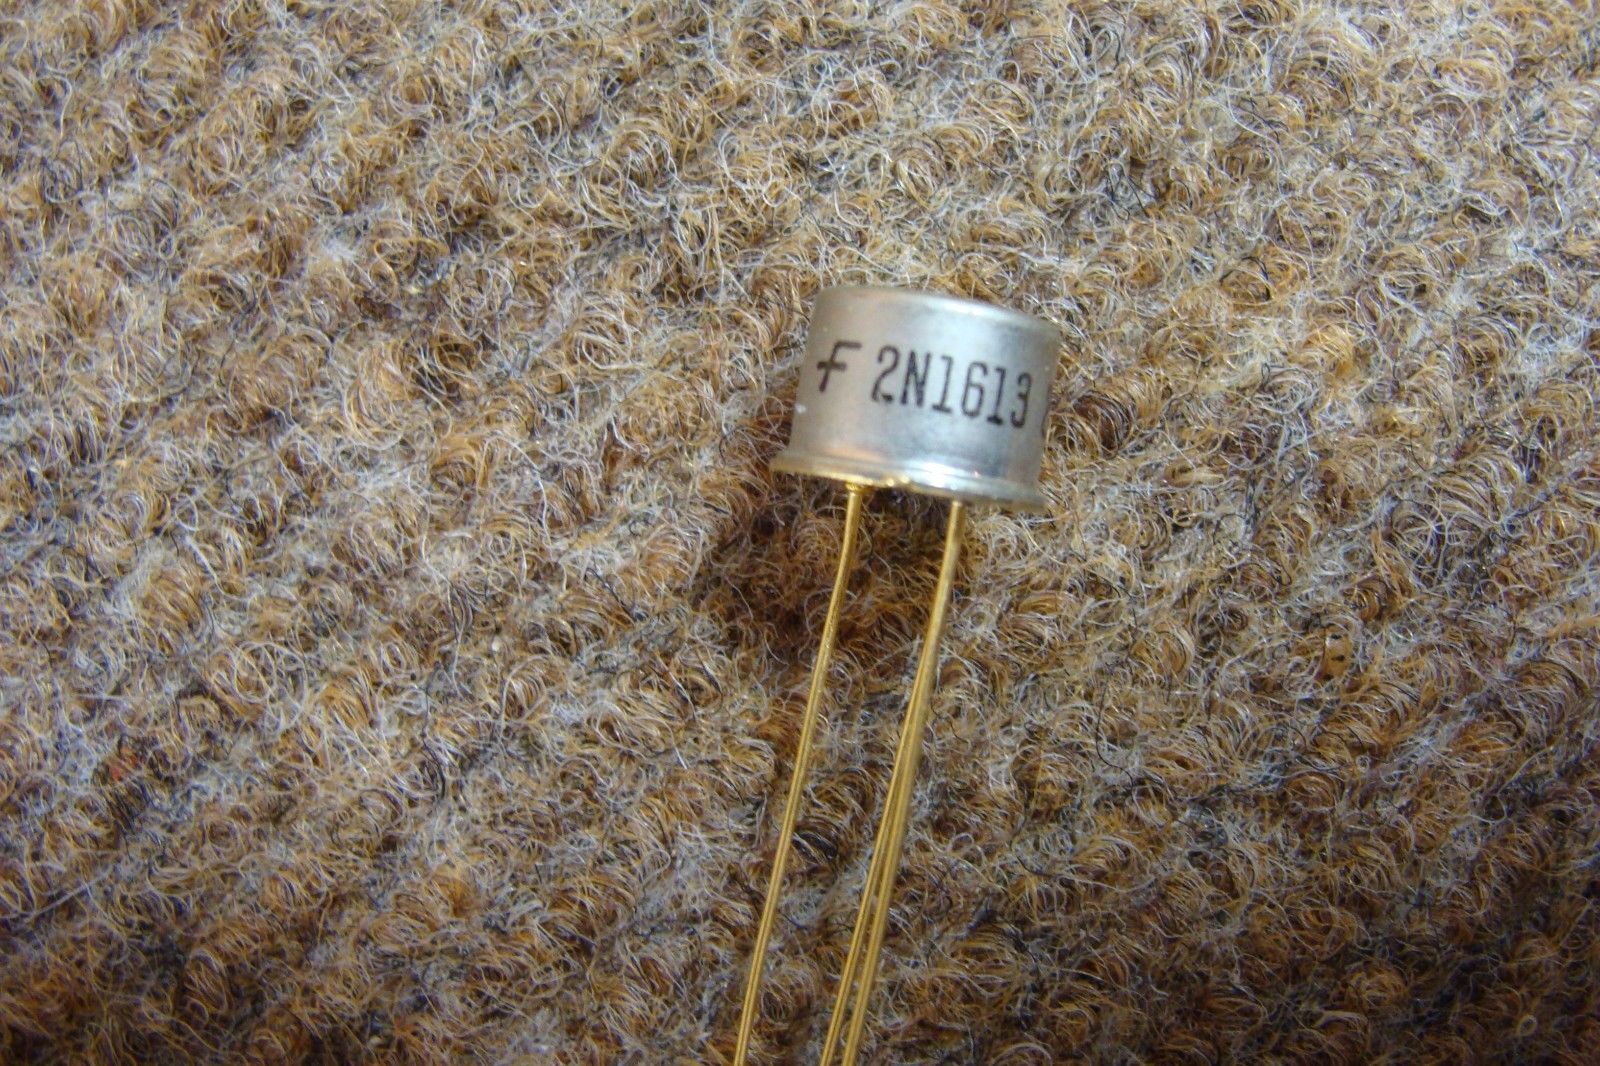 Historic 1962 Fairchild 2N1613 Transistor: The First Planar Device Ever Produced